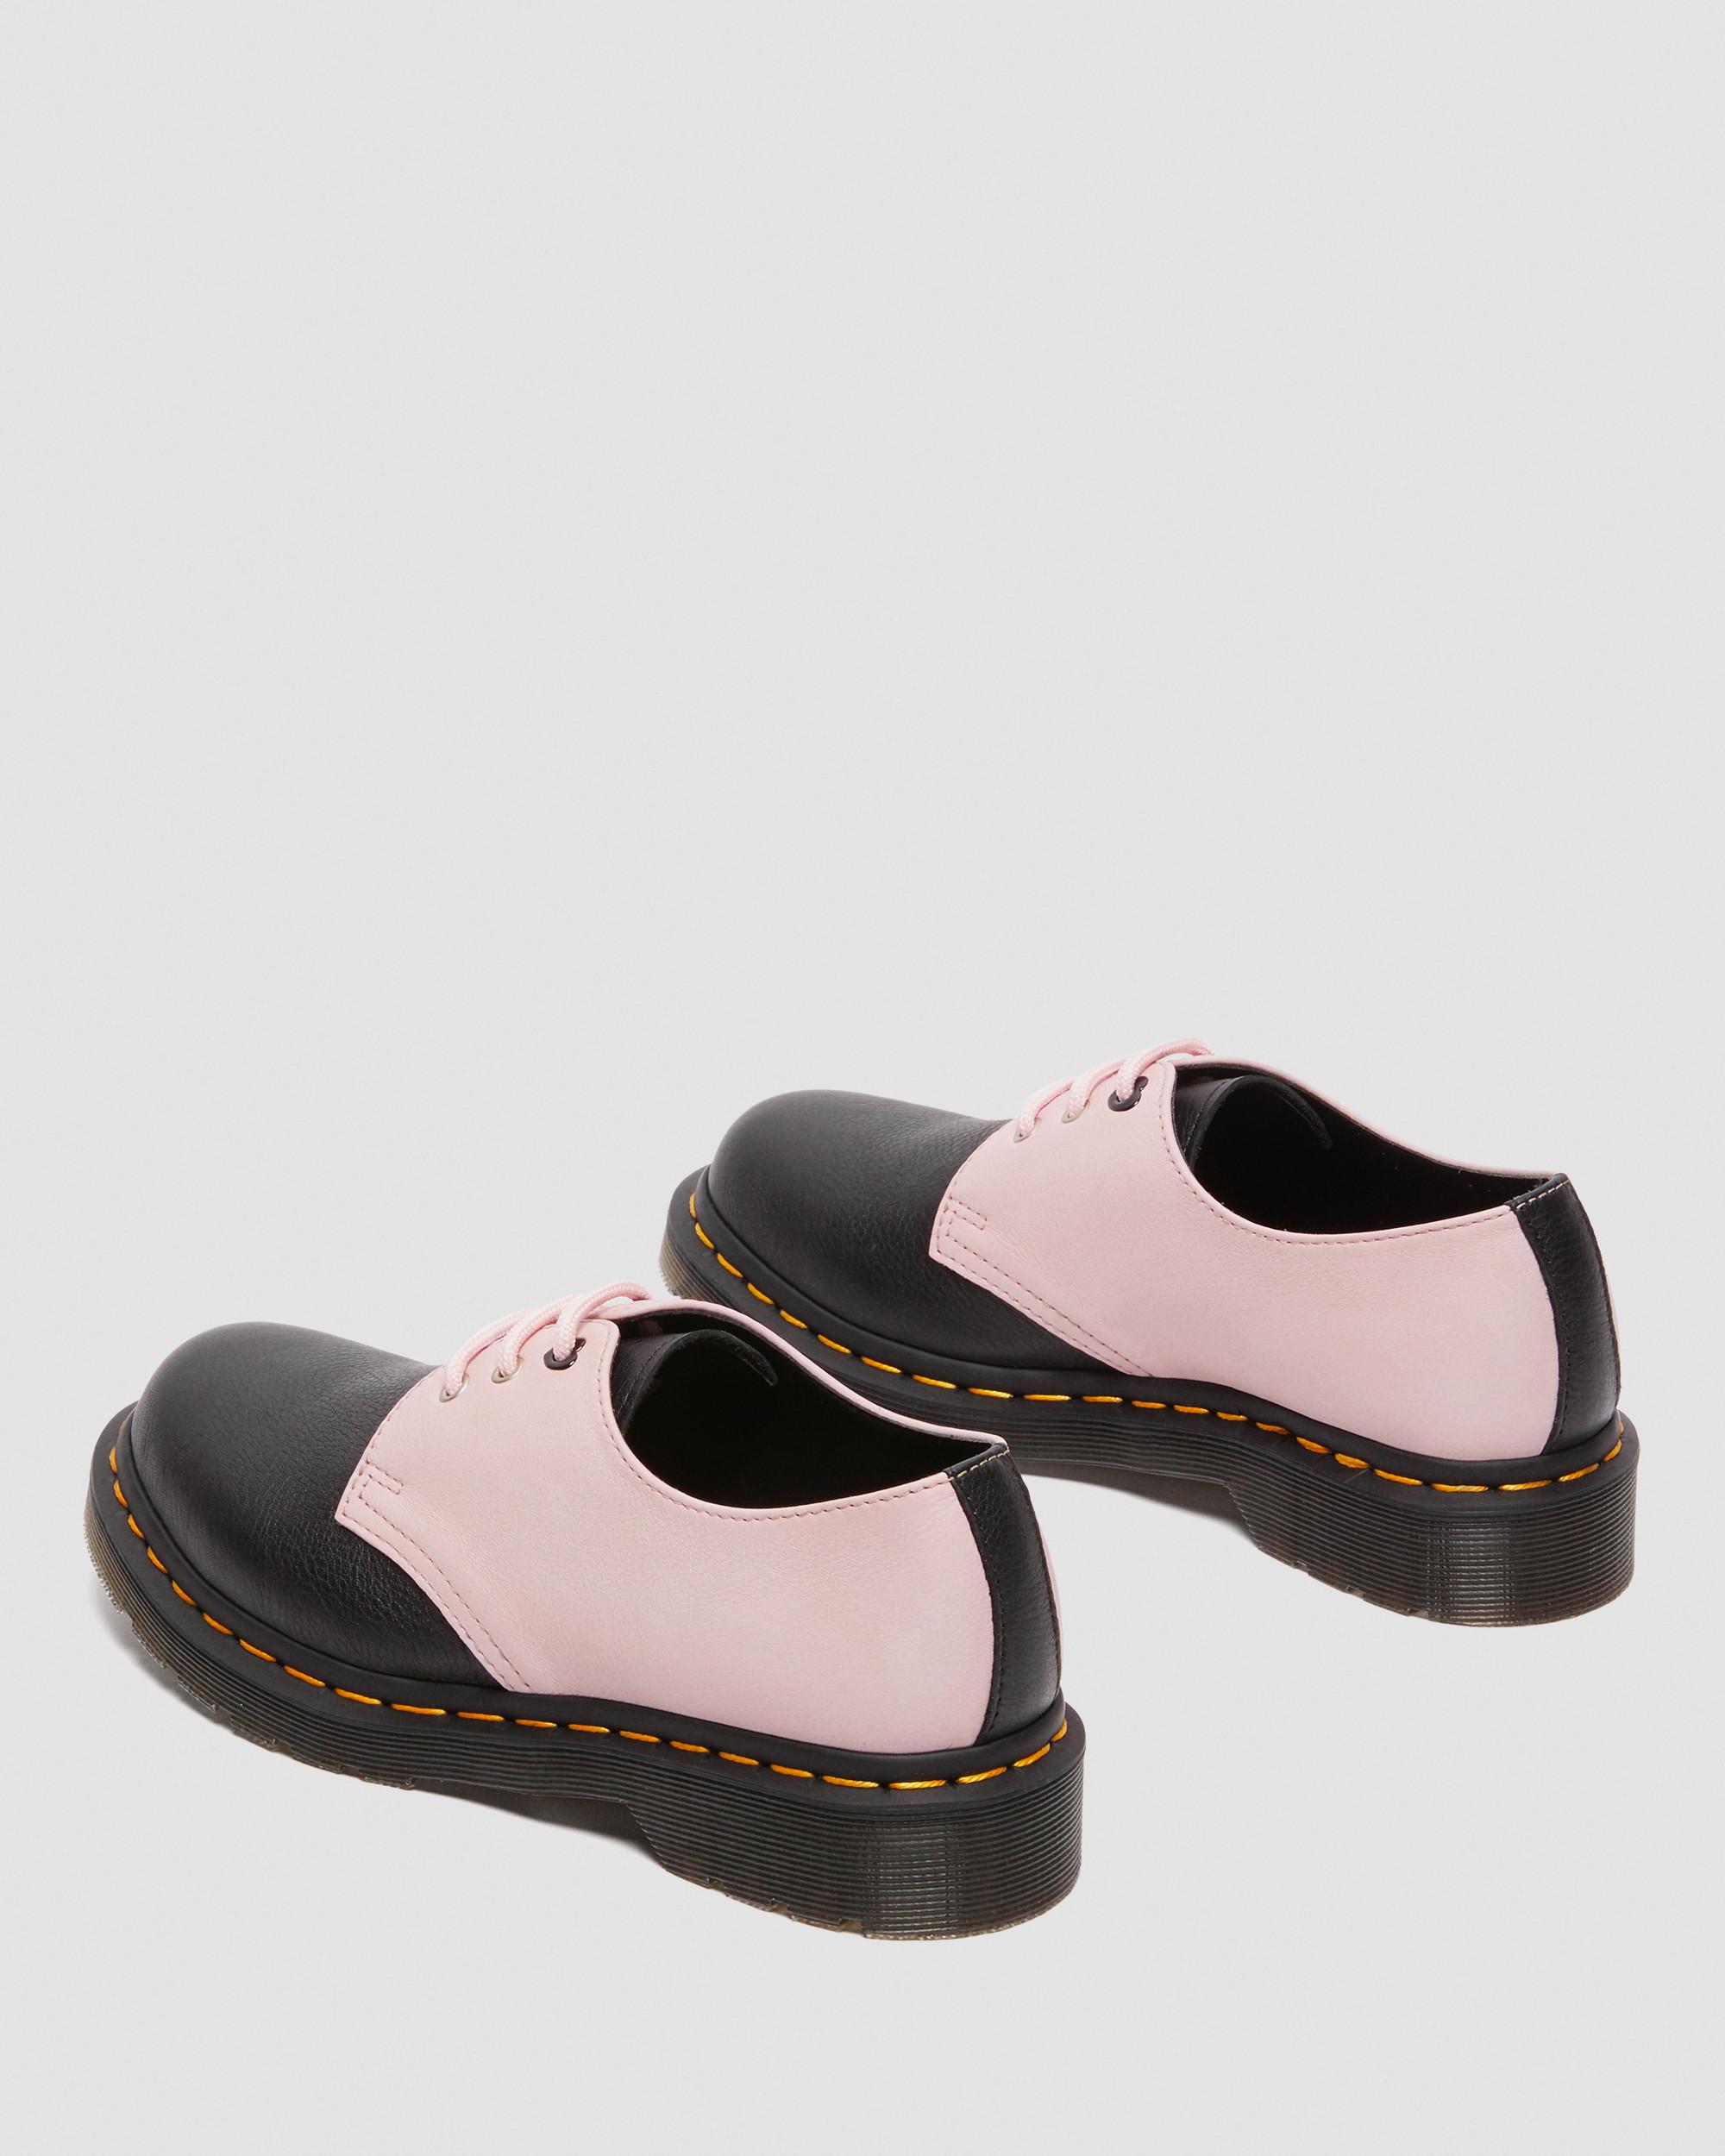 1461 Contrast Virginia Leather Oxford Shoes1461 Contrast Virginia Leather Oxford Shoes Dr. Martens